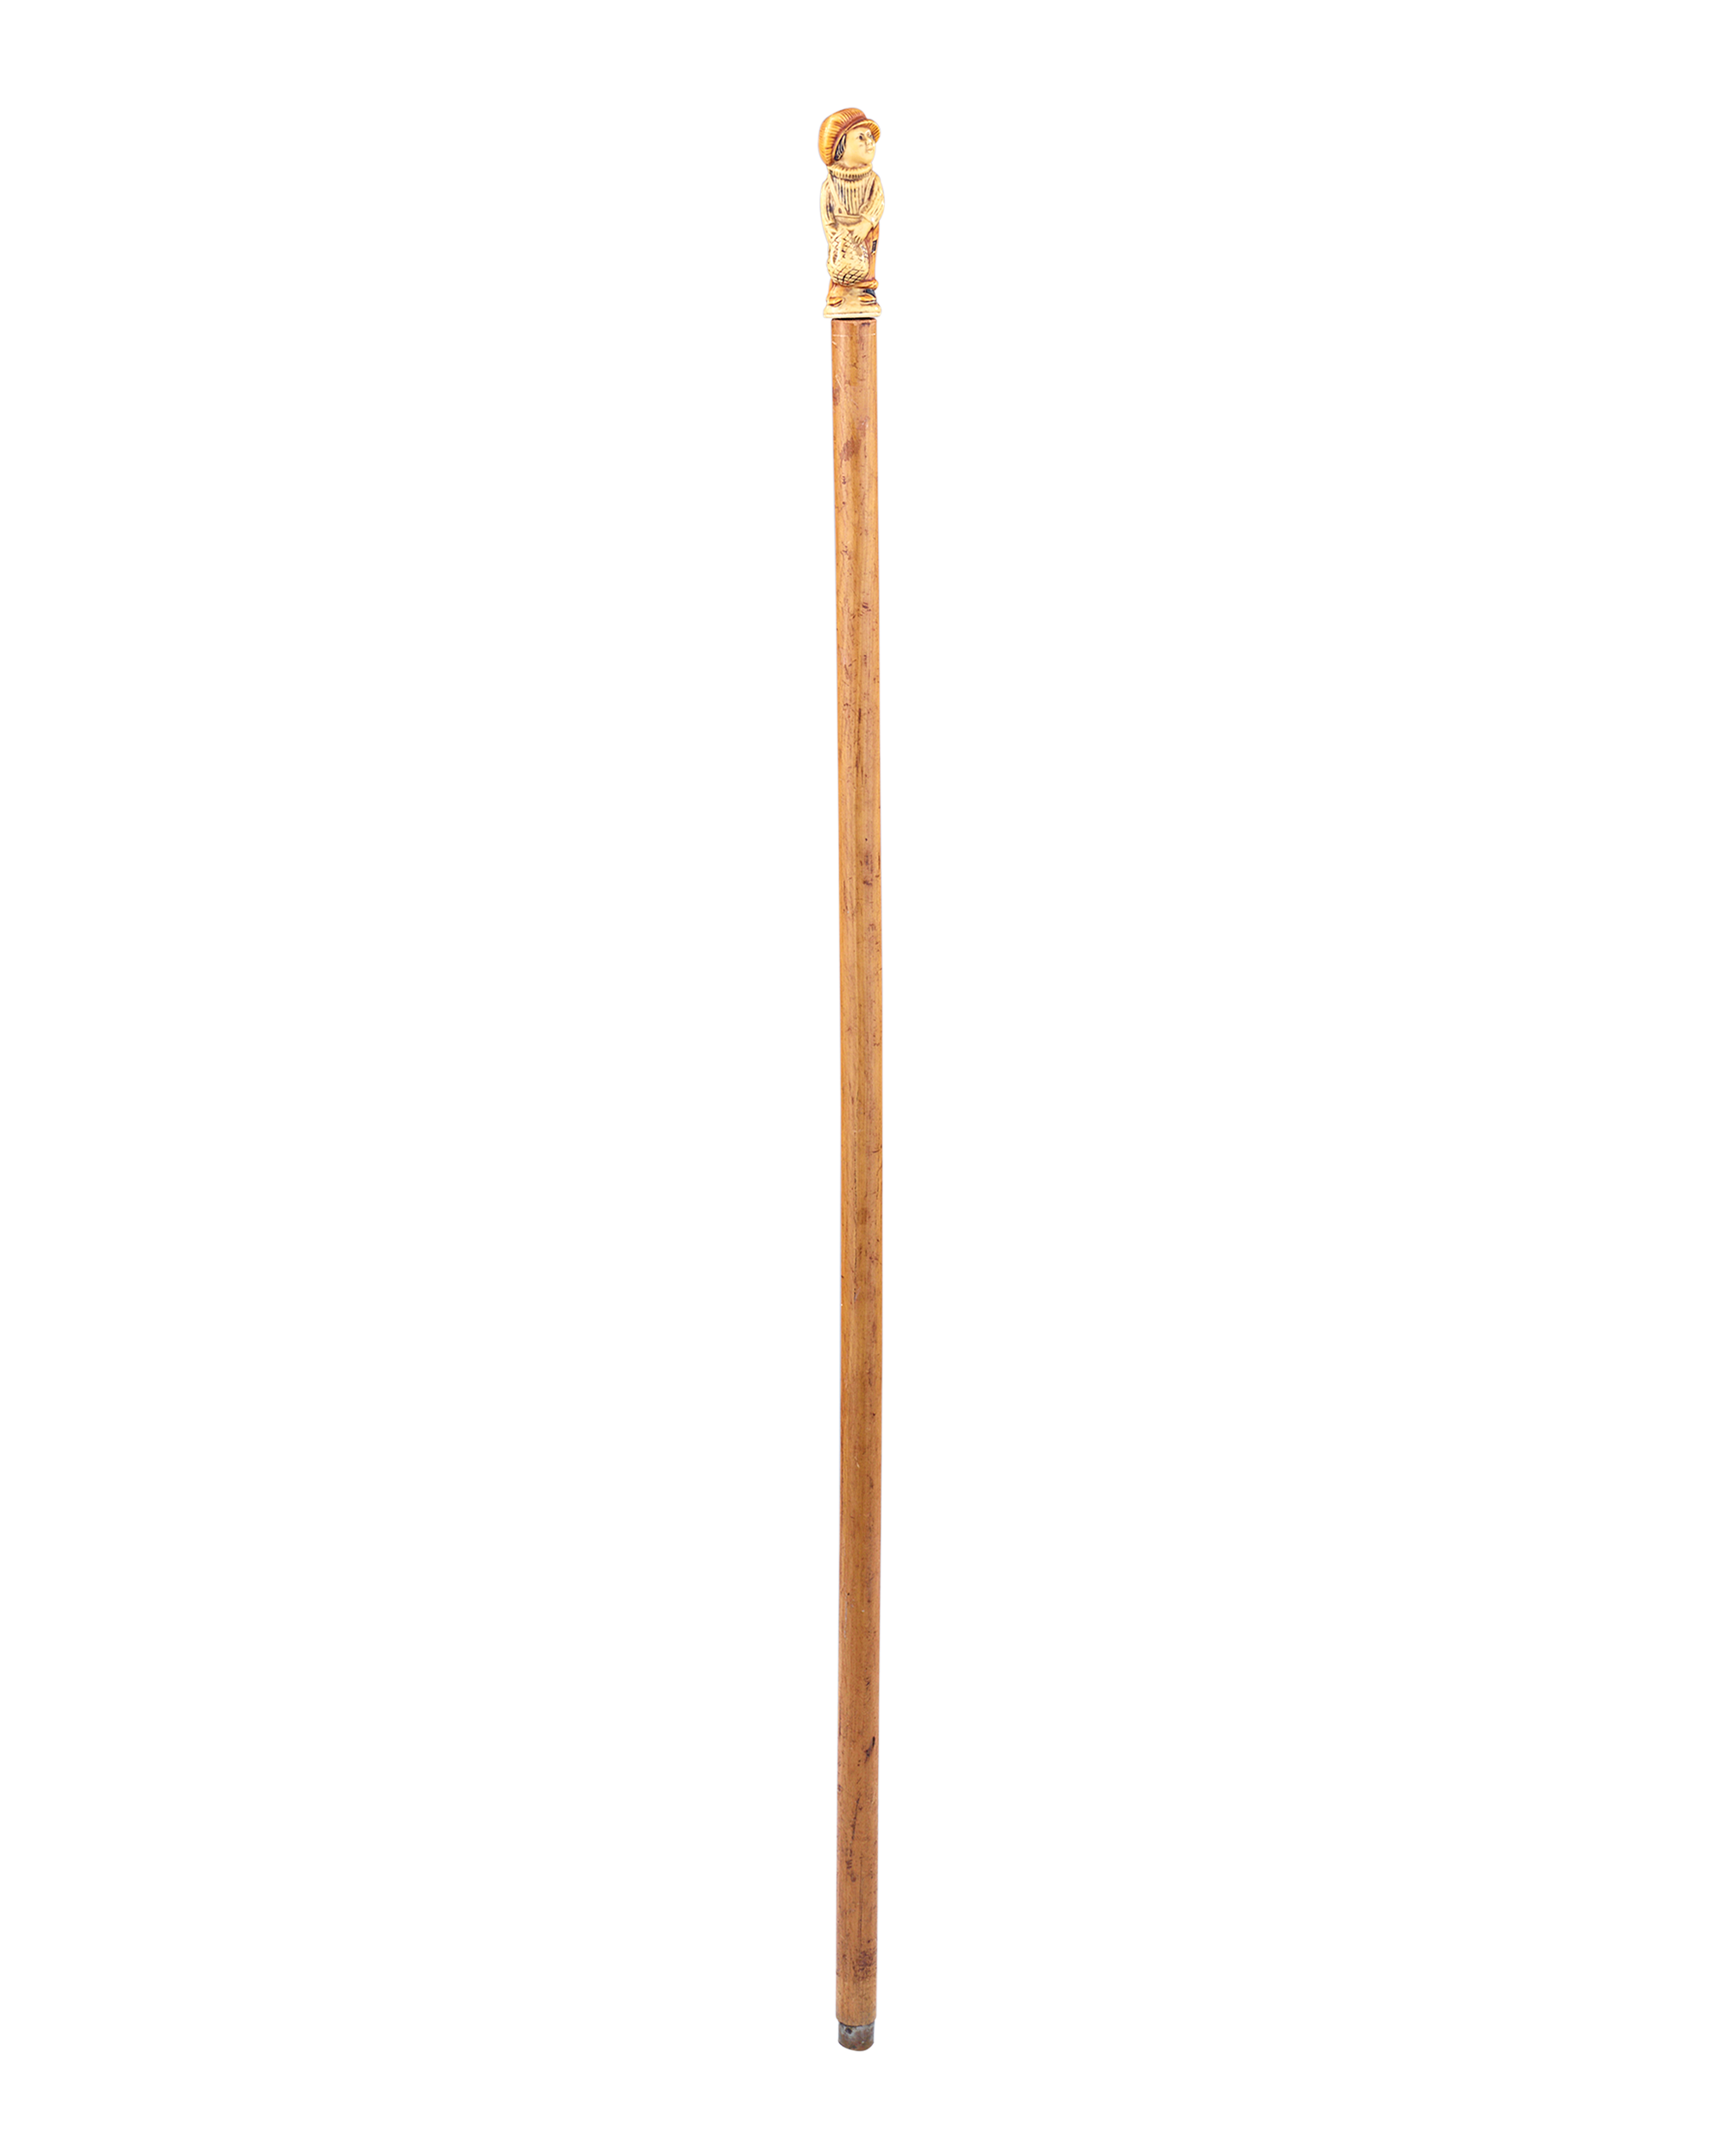 Carved Peasant Boy Cane